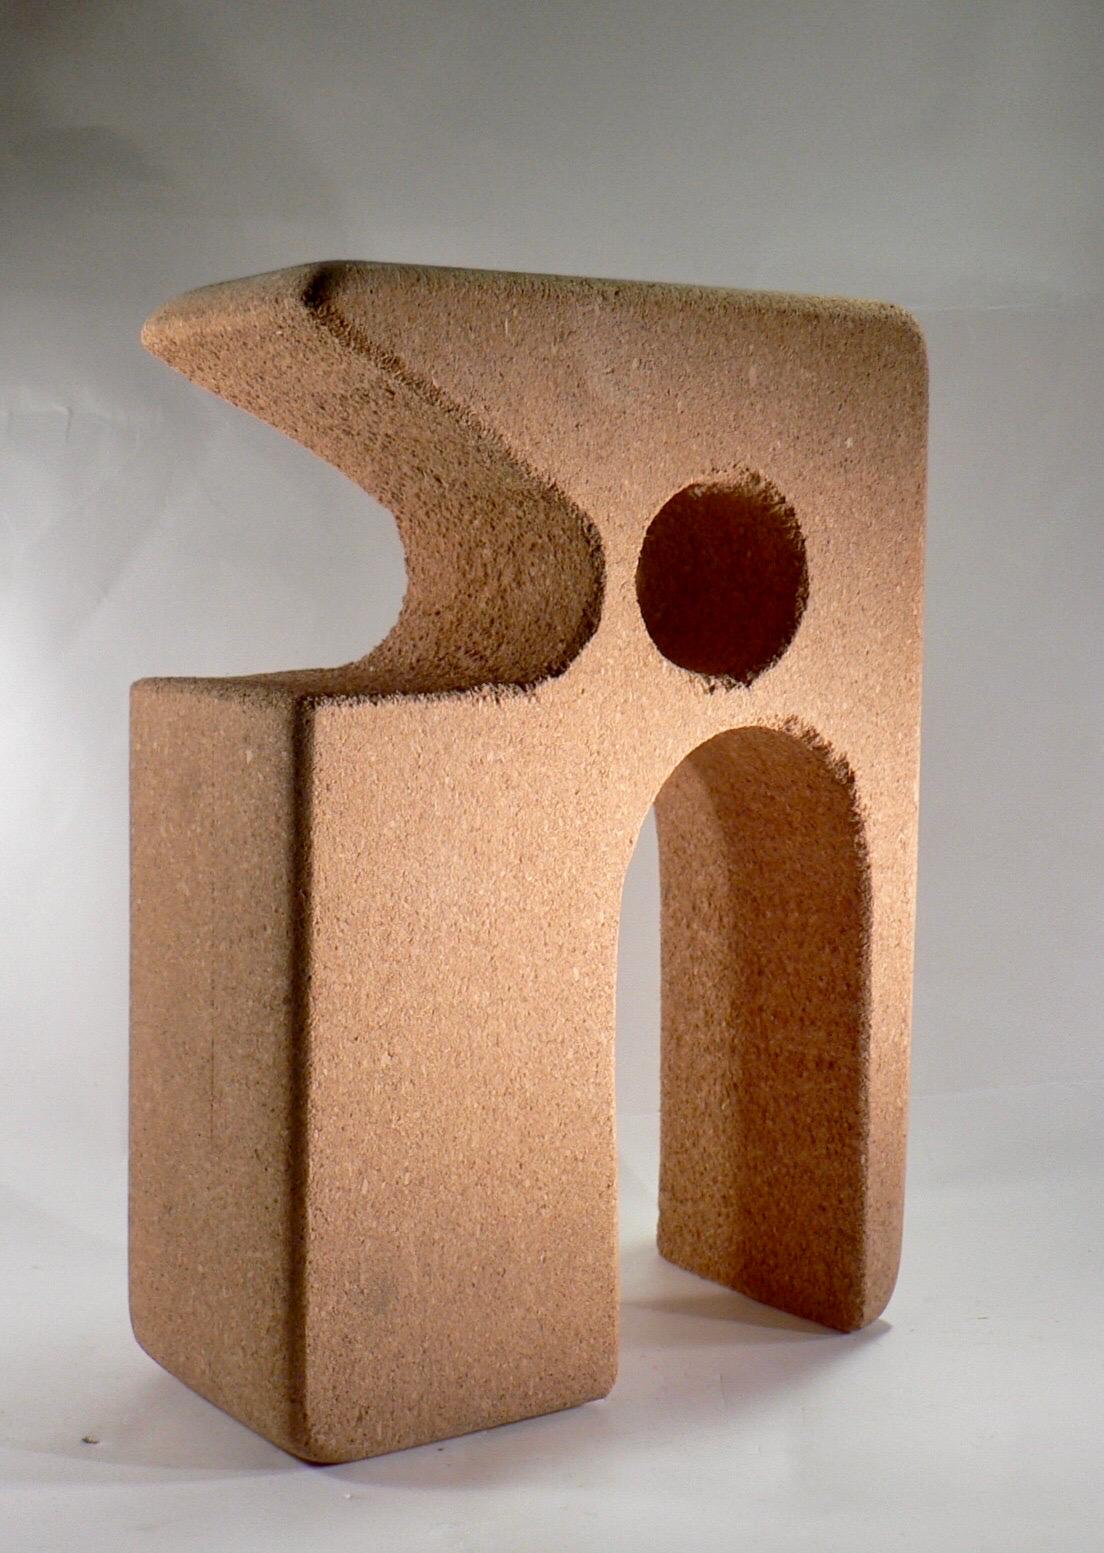 An abstract sculpture carved from cork - France - 2010

French work from 2010, cork study for Michel Bonhomme's stone lamps.